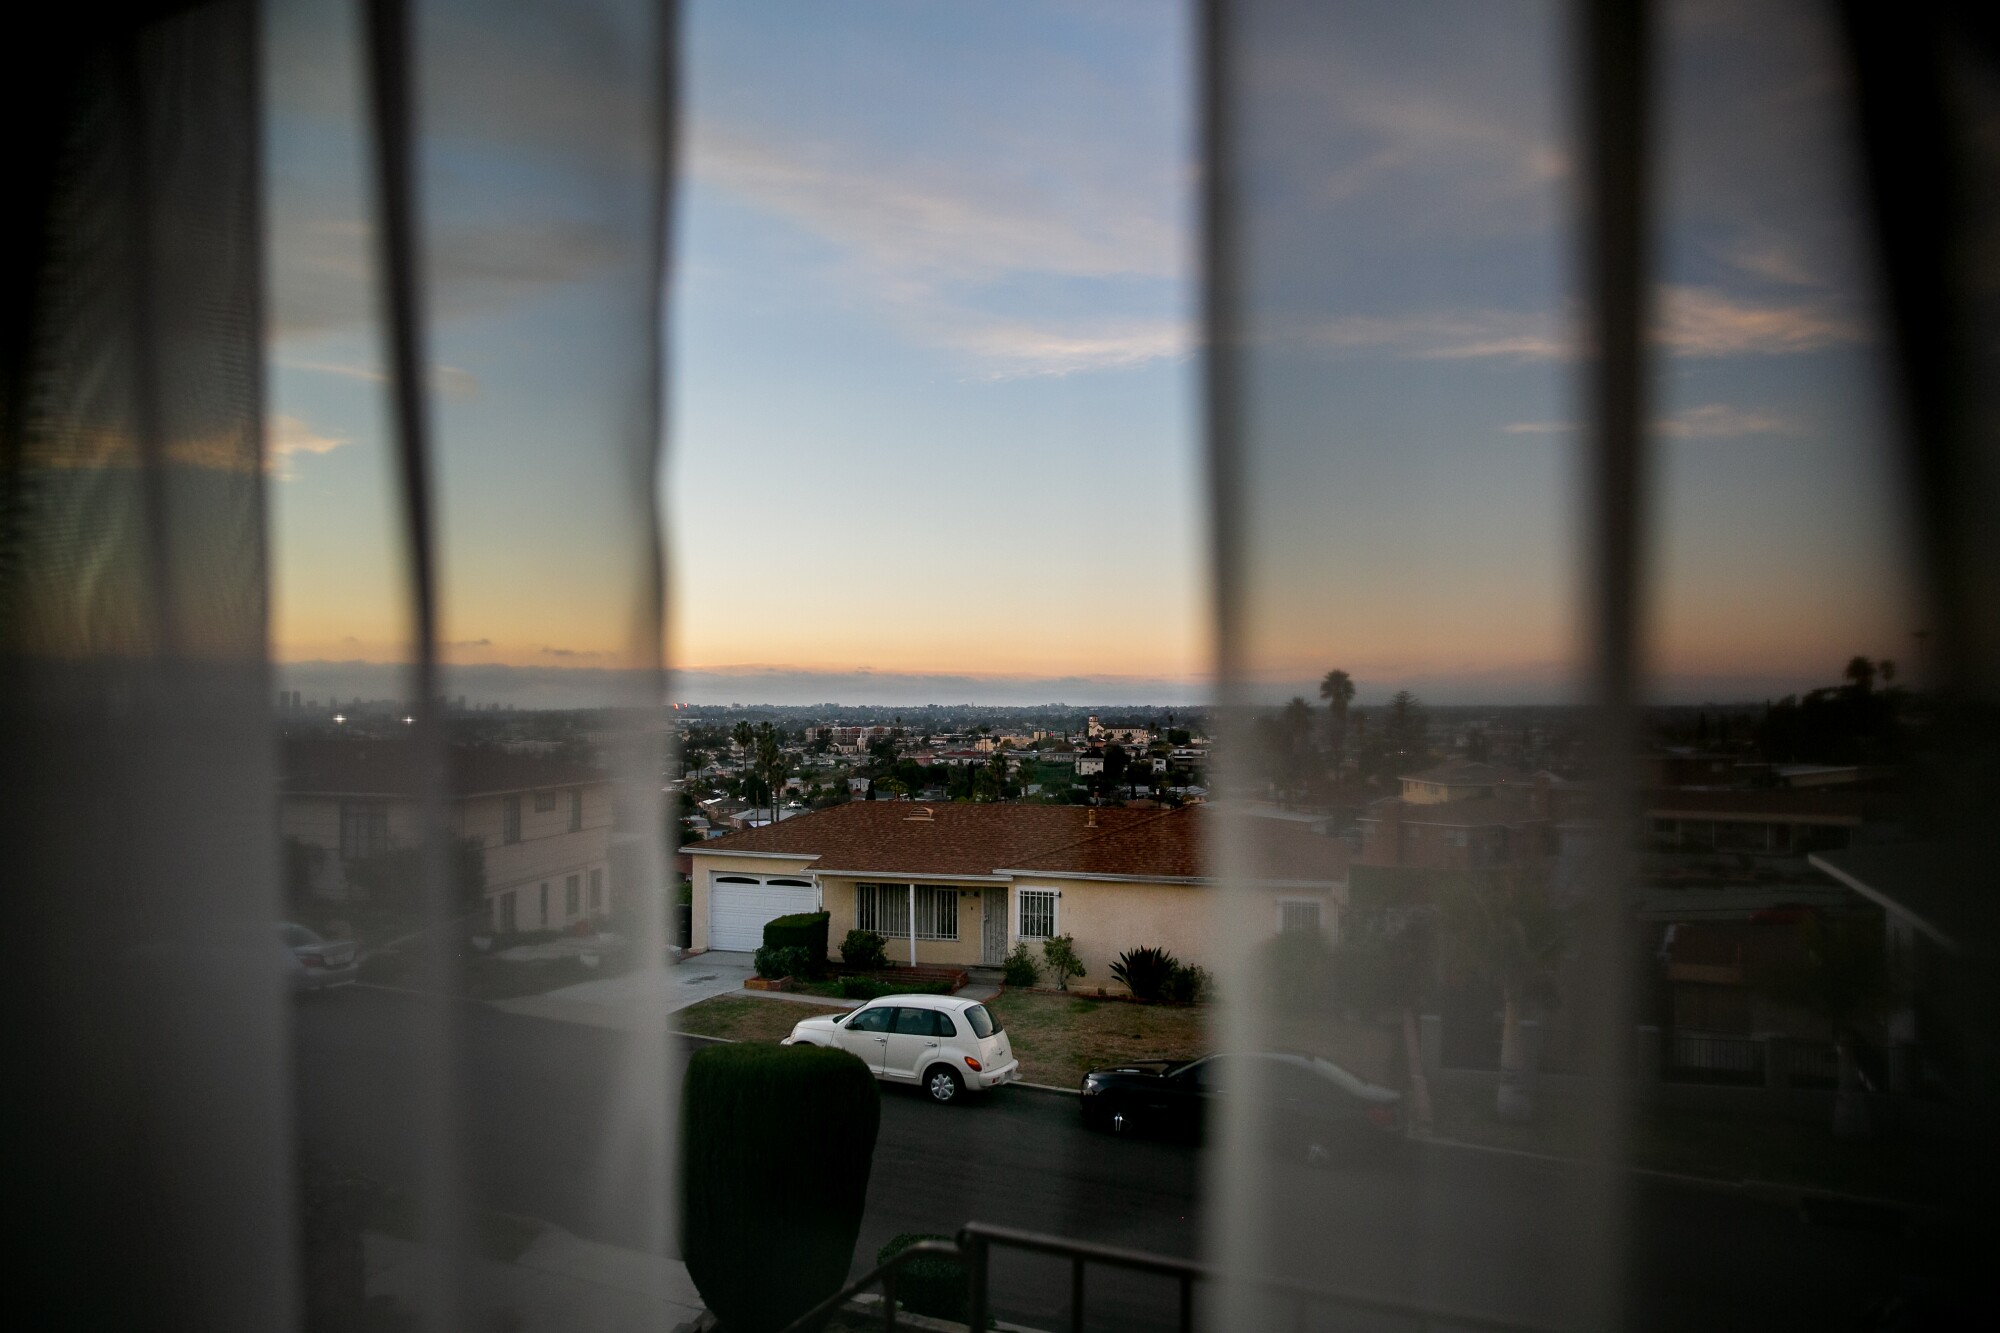 From the window of Esther White, 80, she has a clear view of the city, as well as her next door neighbor's home on Encina Drive. The neighbor's house was temporarily the source of a lot of problems for her census block group in Valencia Park, where violent crimes increased to 13 in 2017, from 5 in 2013.